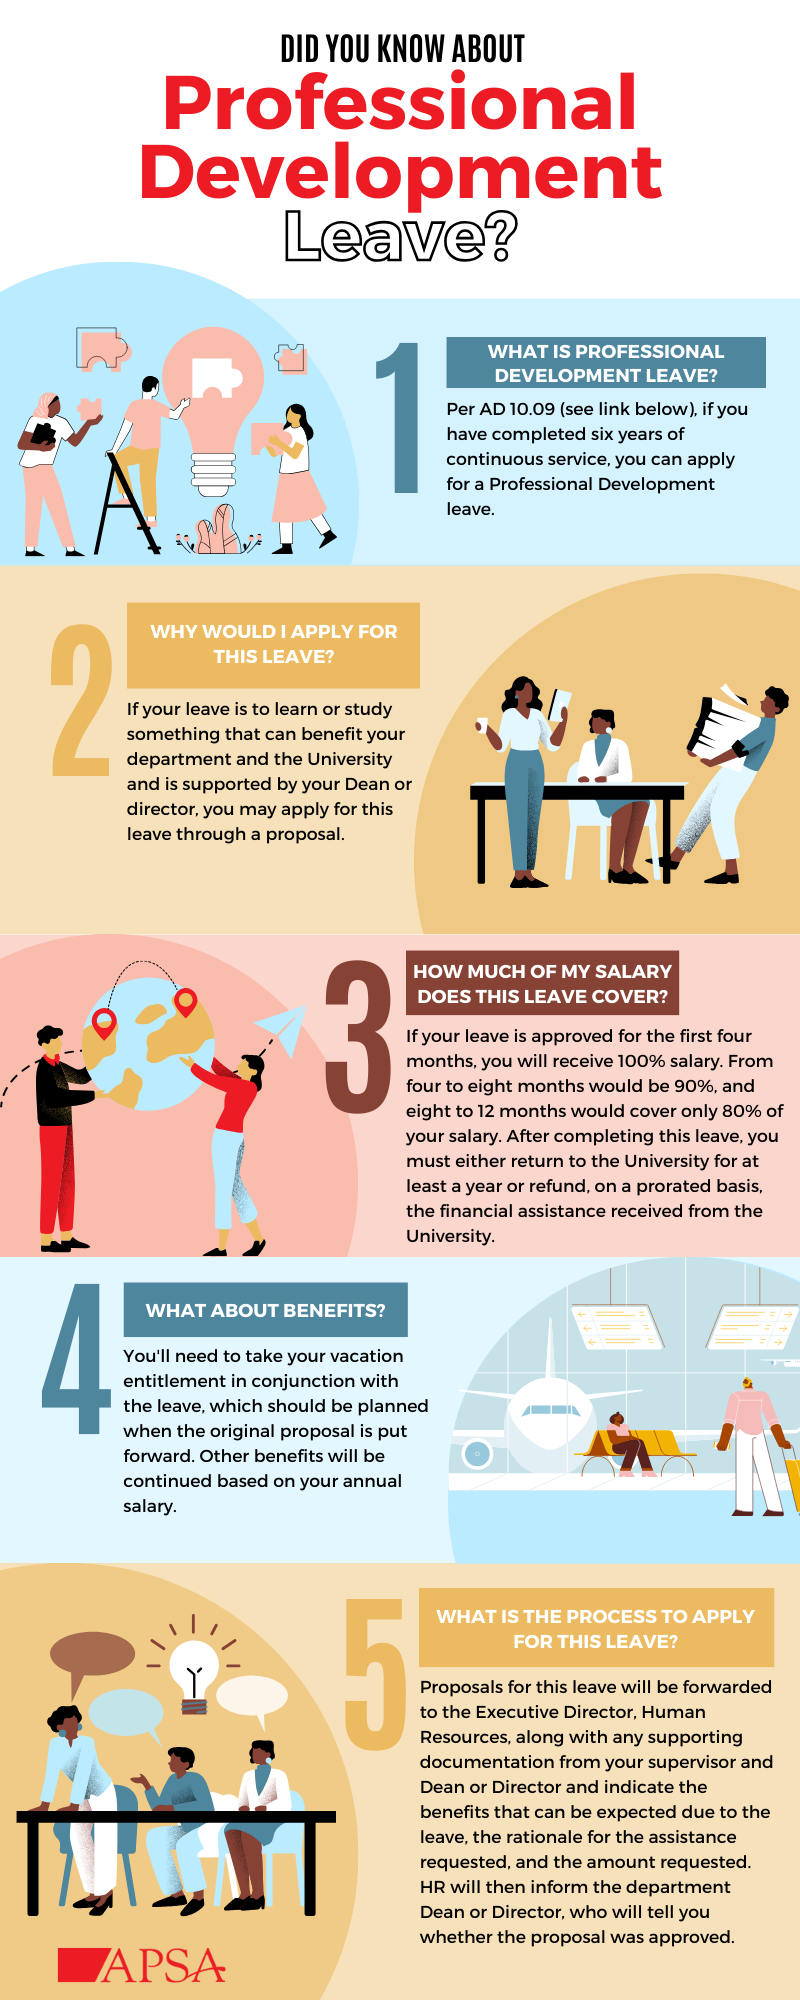 Did You Know About Professional Development Leave